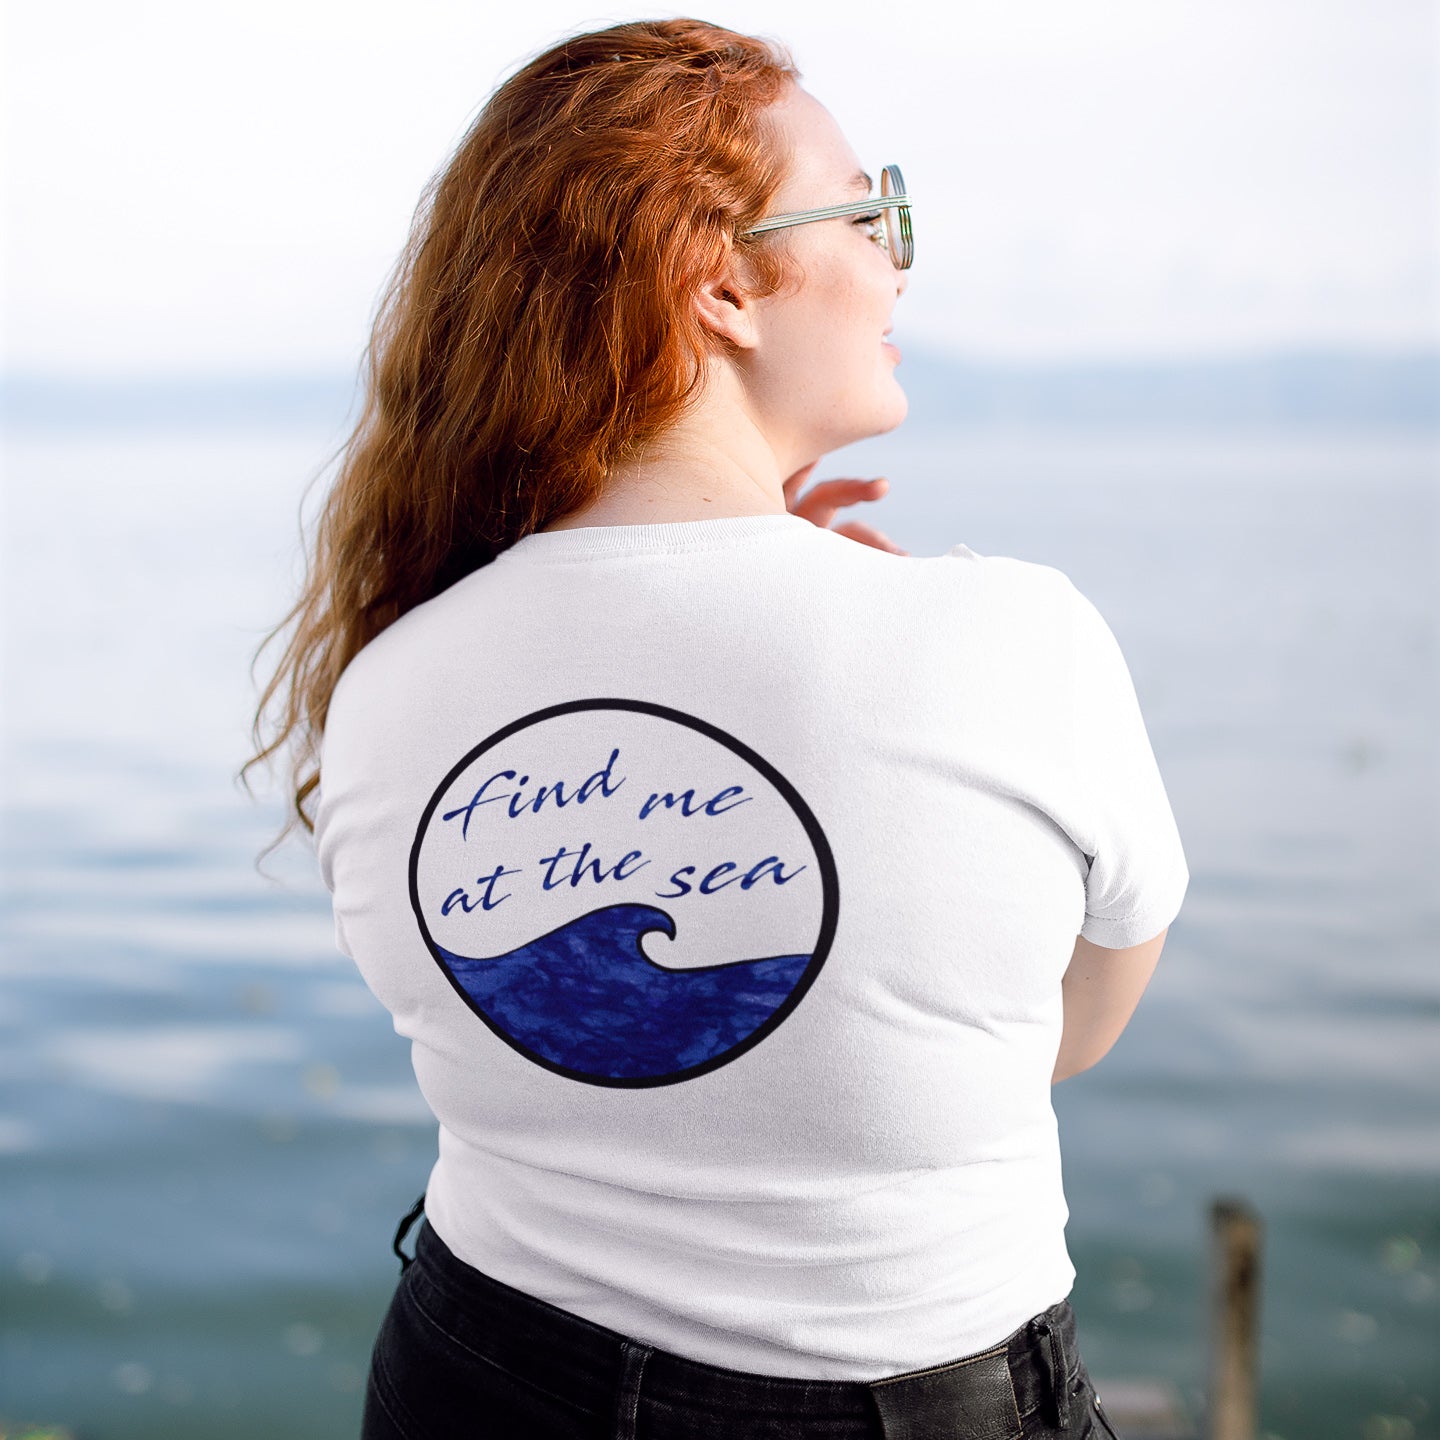 Model Wearing White Find Me At The Sea Short-Sleeve Tee in front of dock on the water - sweetsherriloudesigns - 10% donated to Mission Blue ocean conservation